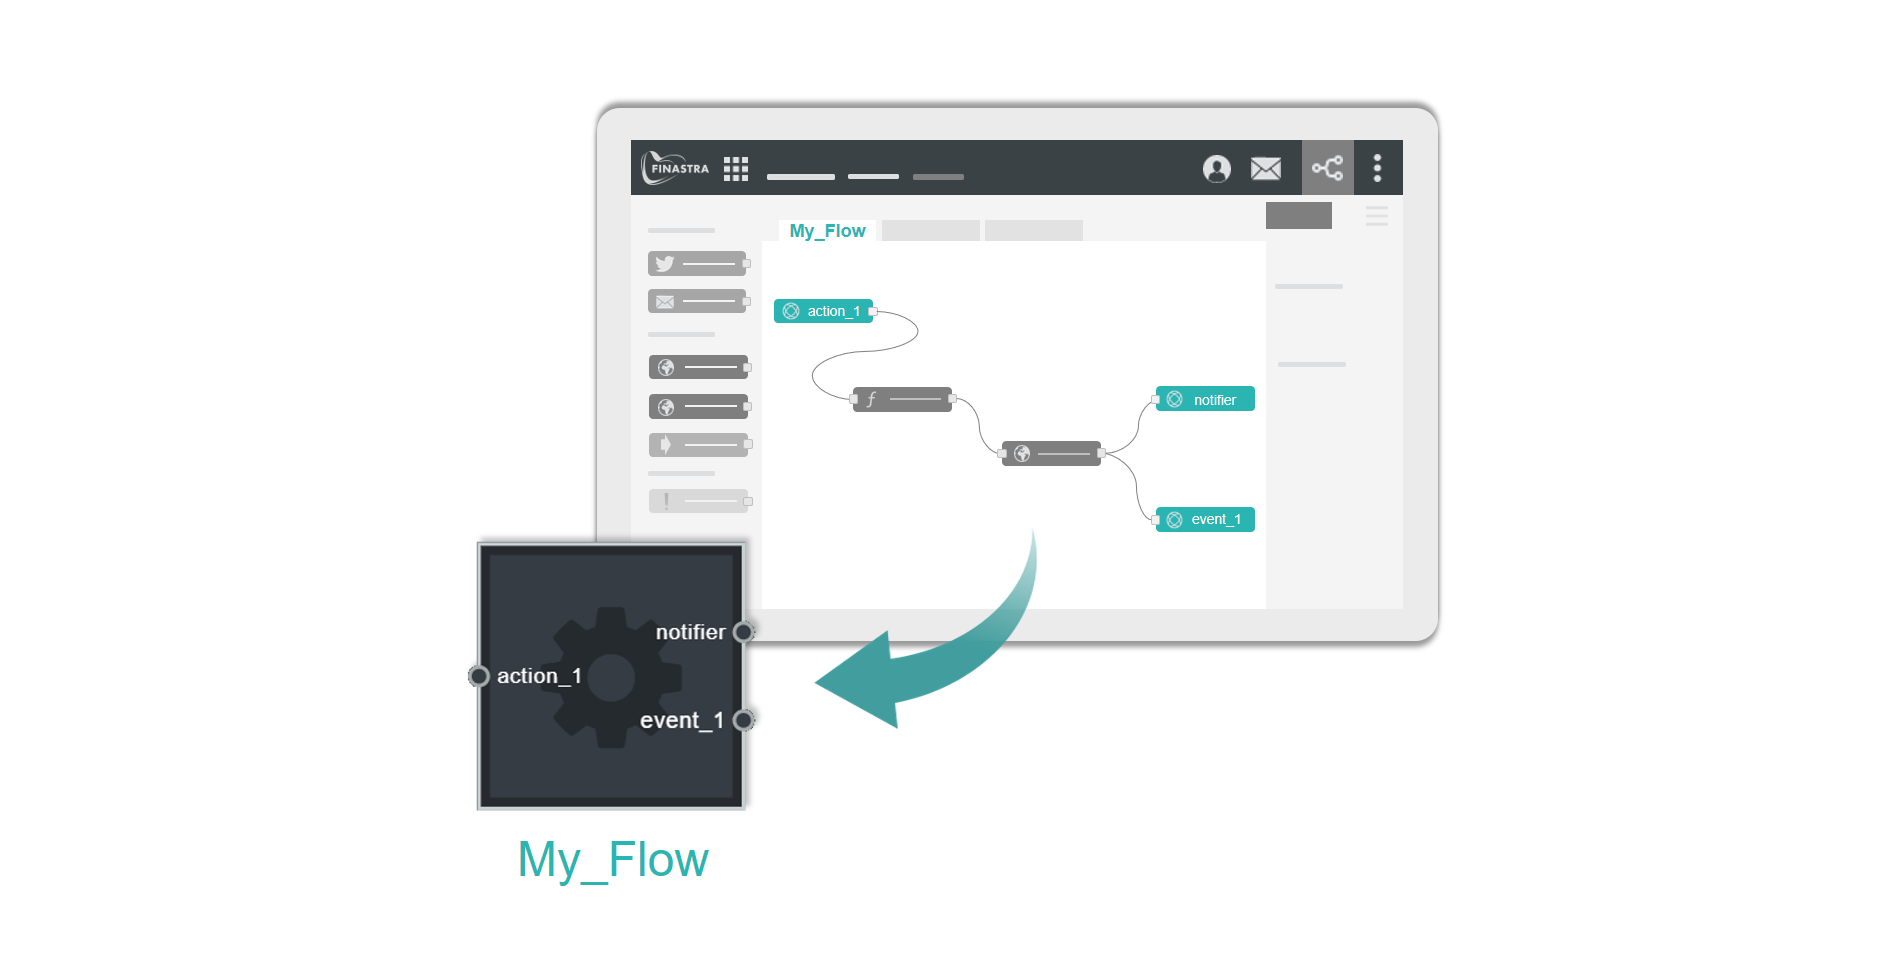 Fig. 11: The Flow represented in the Link Editor.